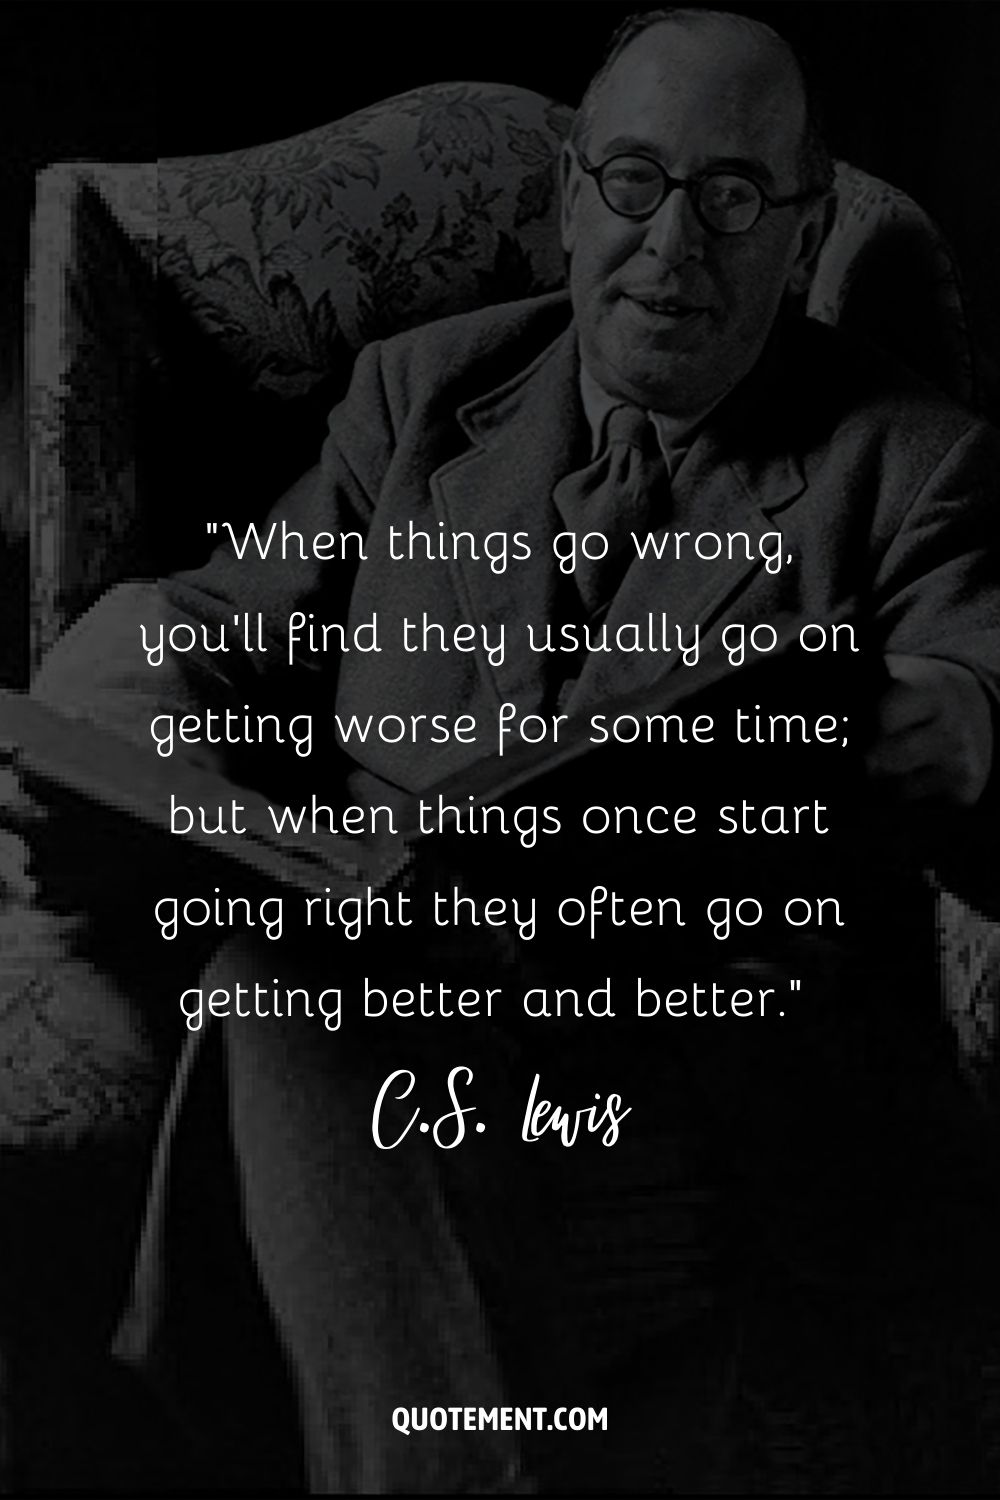 C.S. Lewis, sitting in a chair with a book in hand, wearing a gentle smile